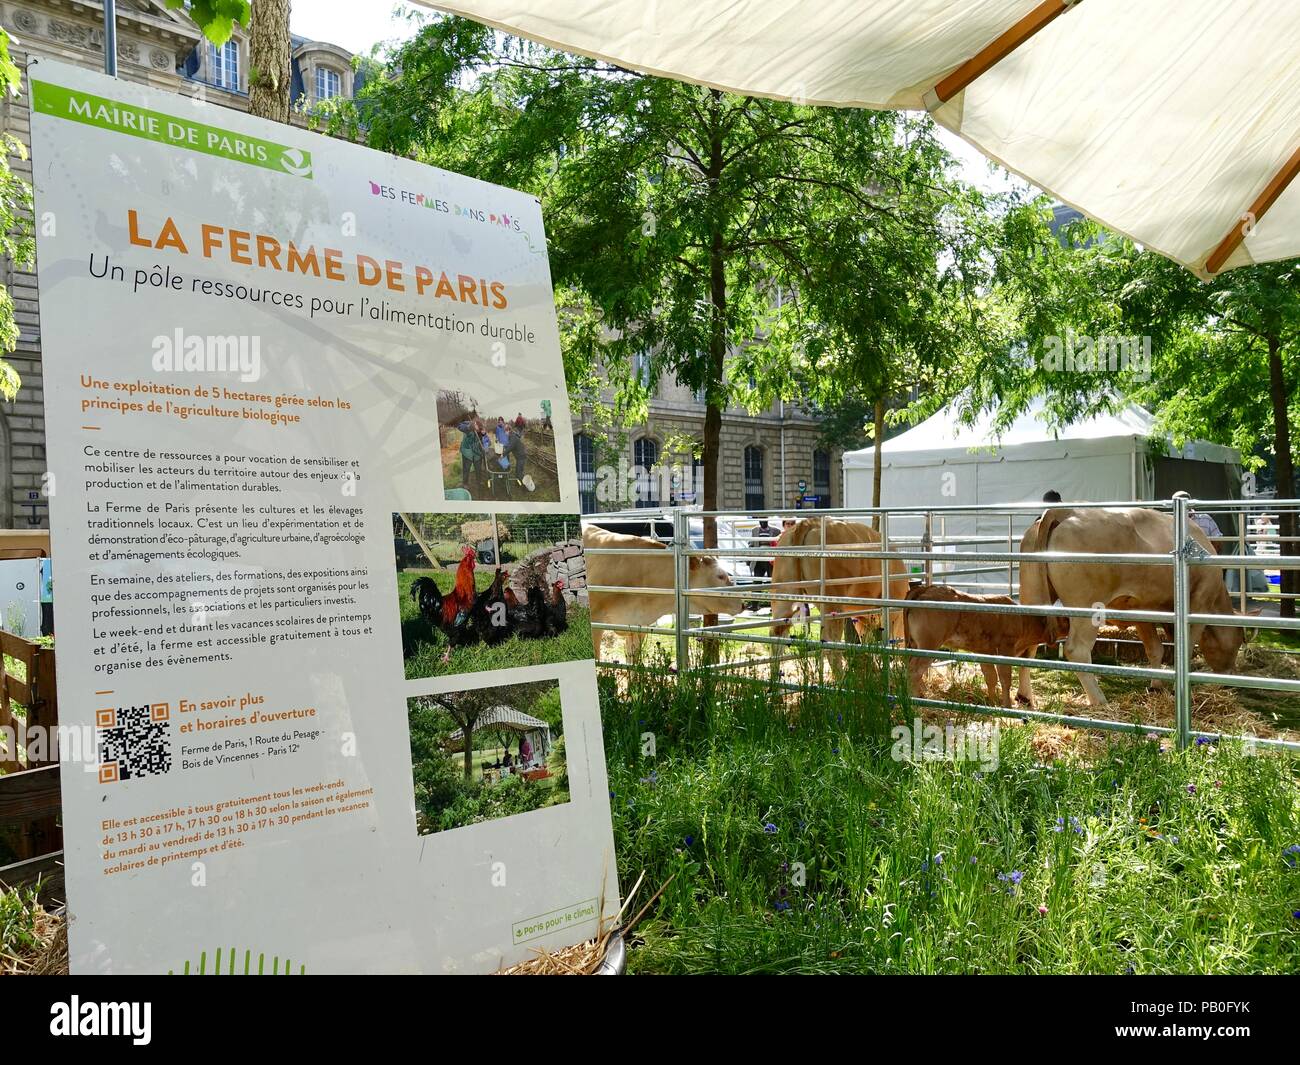 Cows in a pen at Place de la Republique during an educational demonstration about farming and sustainability sponsored by the city. Paris, France Stock Photo